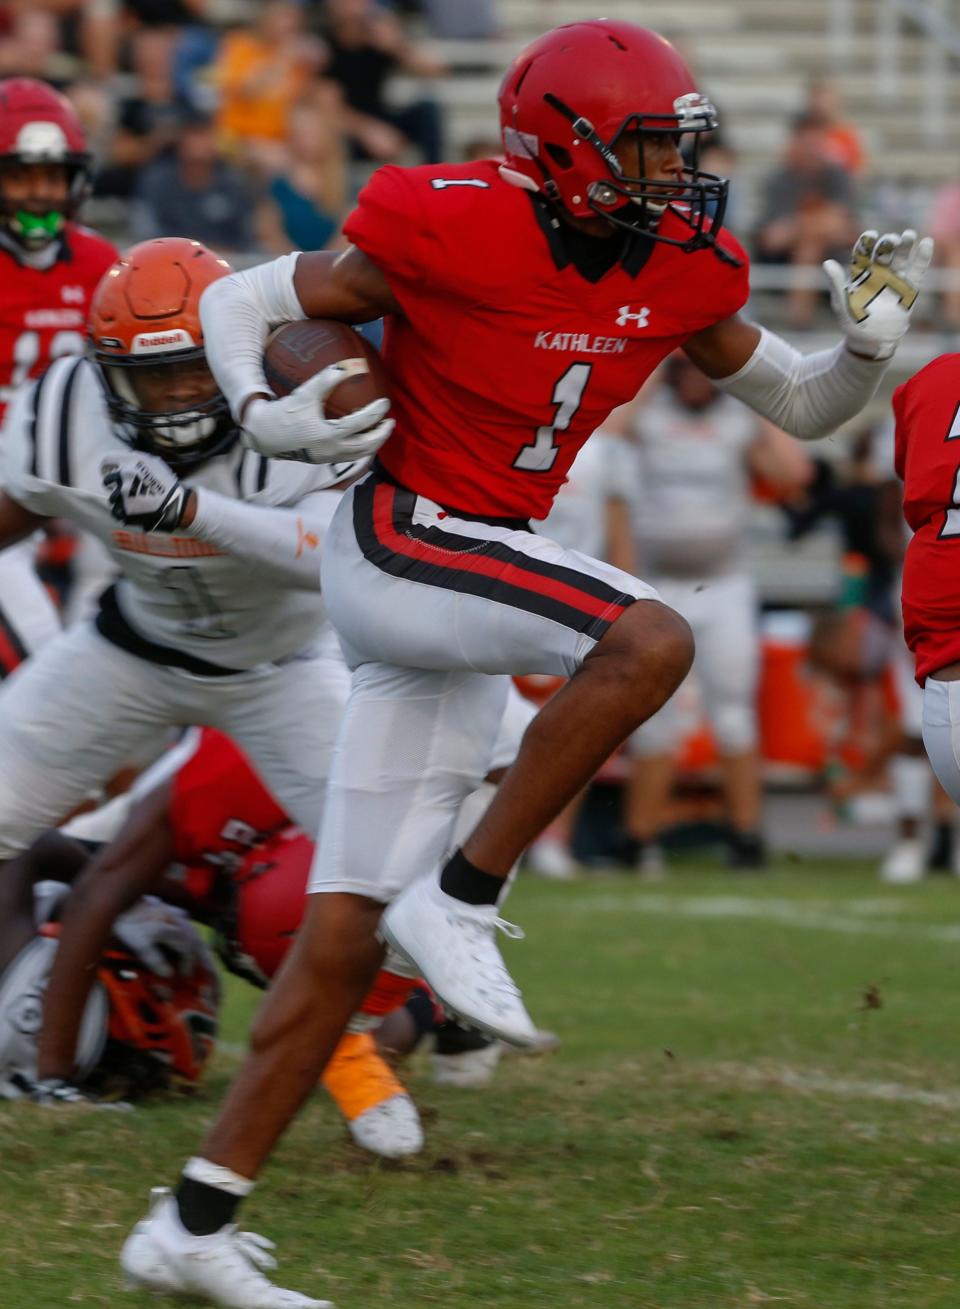 Kathleen's #1 Shadarian Harrison cuts up hill against  Zephyrhills secondary for a first down in the first quarter. Kathleen High School Vs Zephyrhills High School at Kathleen Hight Lakeland Fl, August 27th 2021. Special to the Ledger/ Calvin Knight